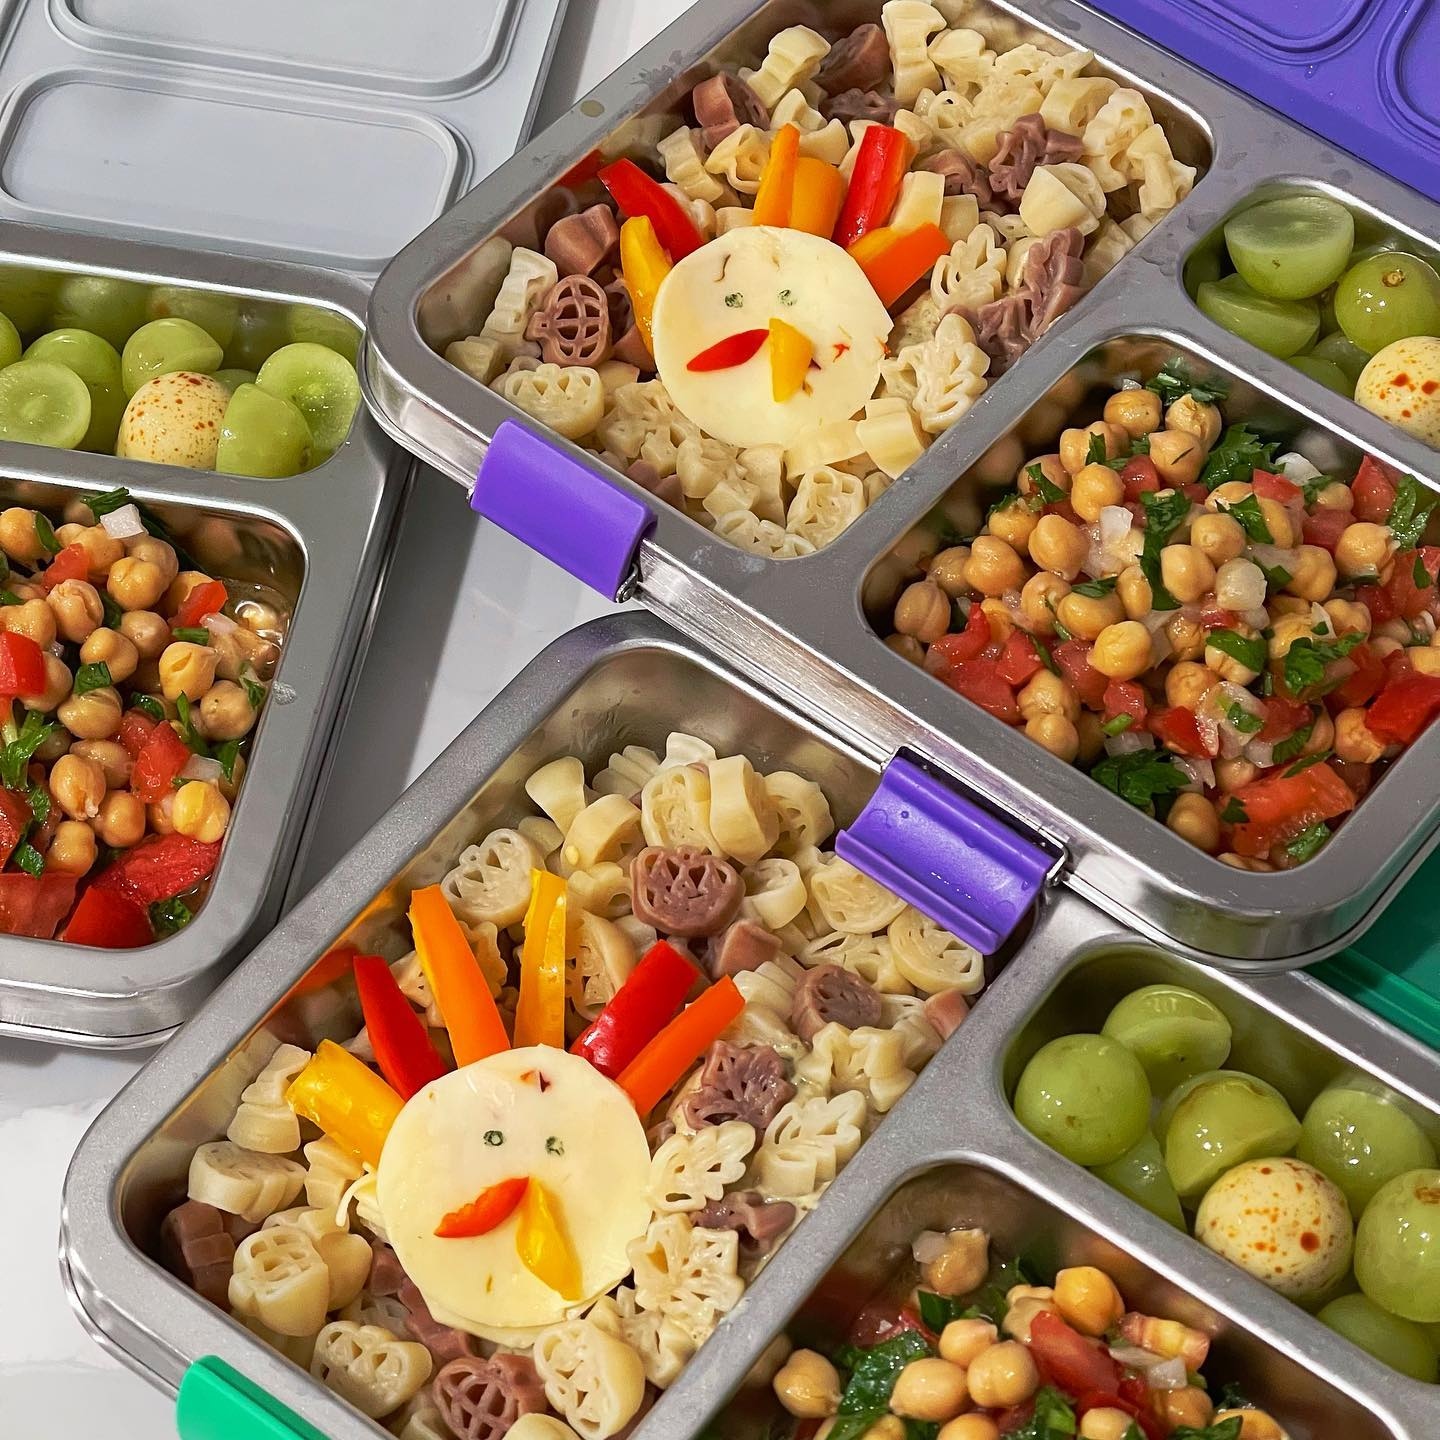 Bentgo on X: Gobble up this goodness! 🦃✨ @lunchwiththeseasons packed a  harvest-shaped pasta dish in her Bentgo Kids Stainless Steel lunch box🍱💚  She even made a Turkey out of cheese and bell